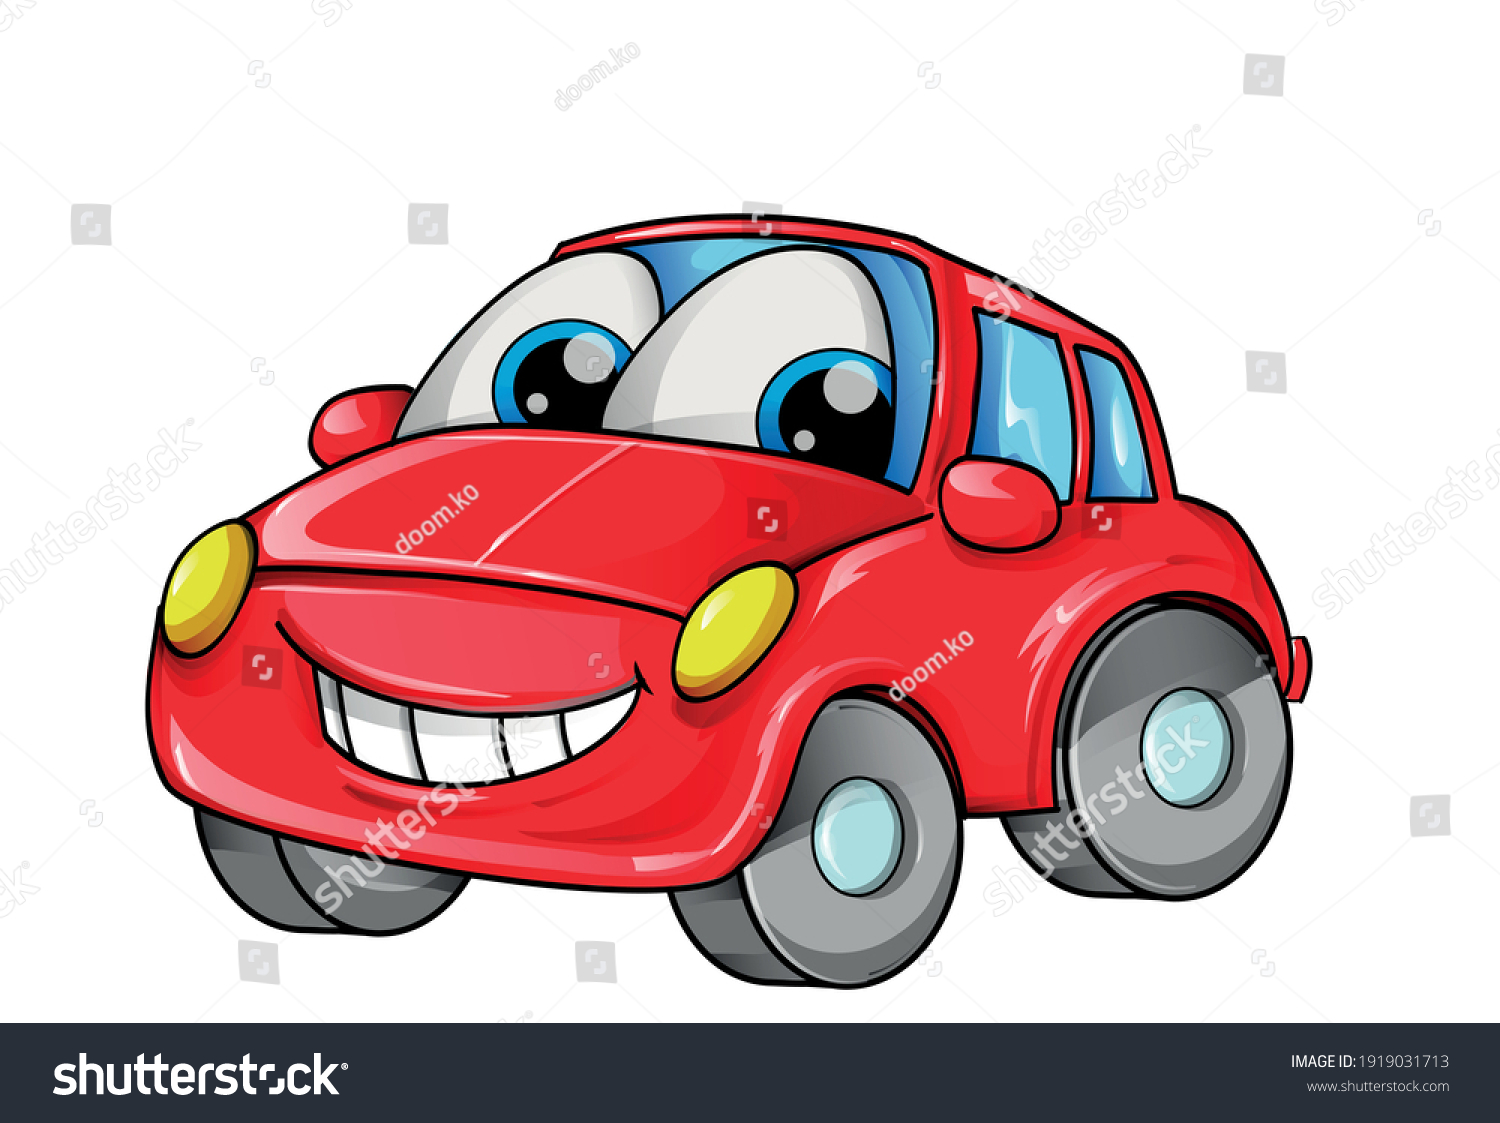 Red Car Mascot Cartoon Isolated On Stock Vector (Royalty Free ...